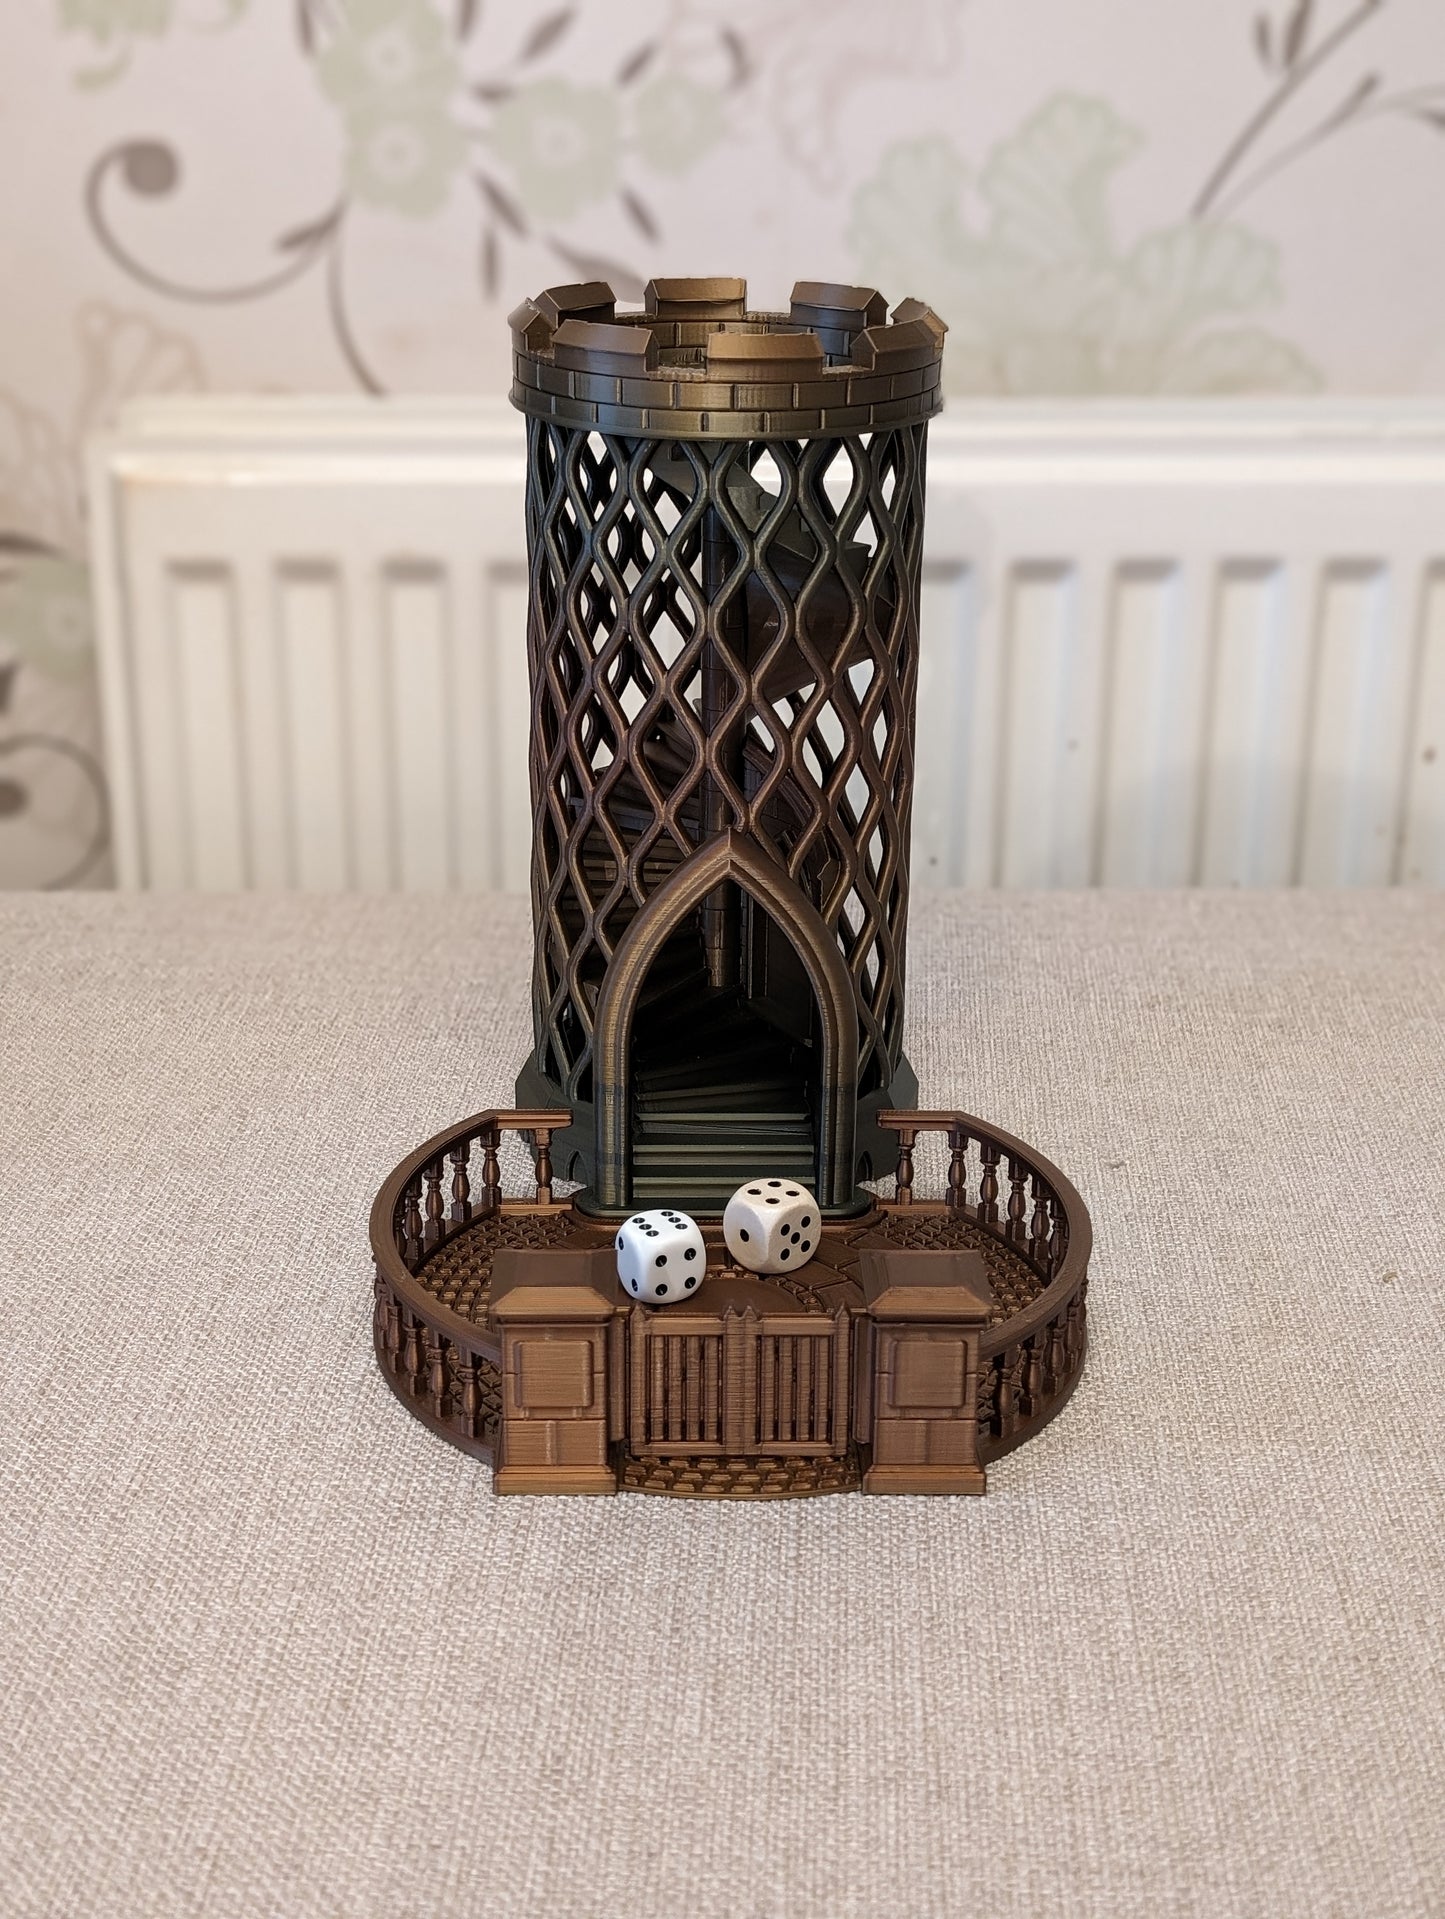 Castle turret dice tower from the front